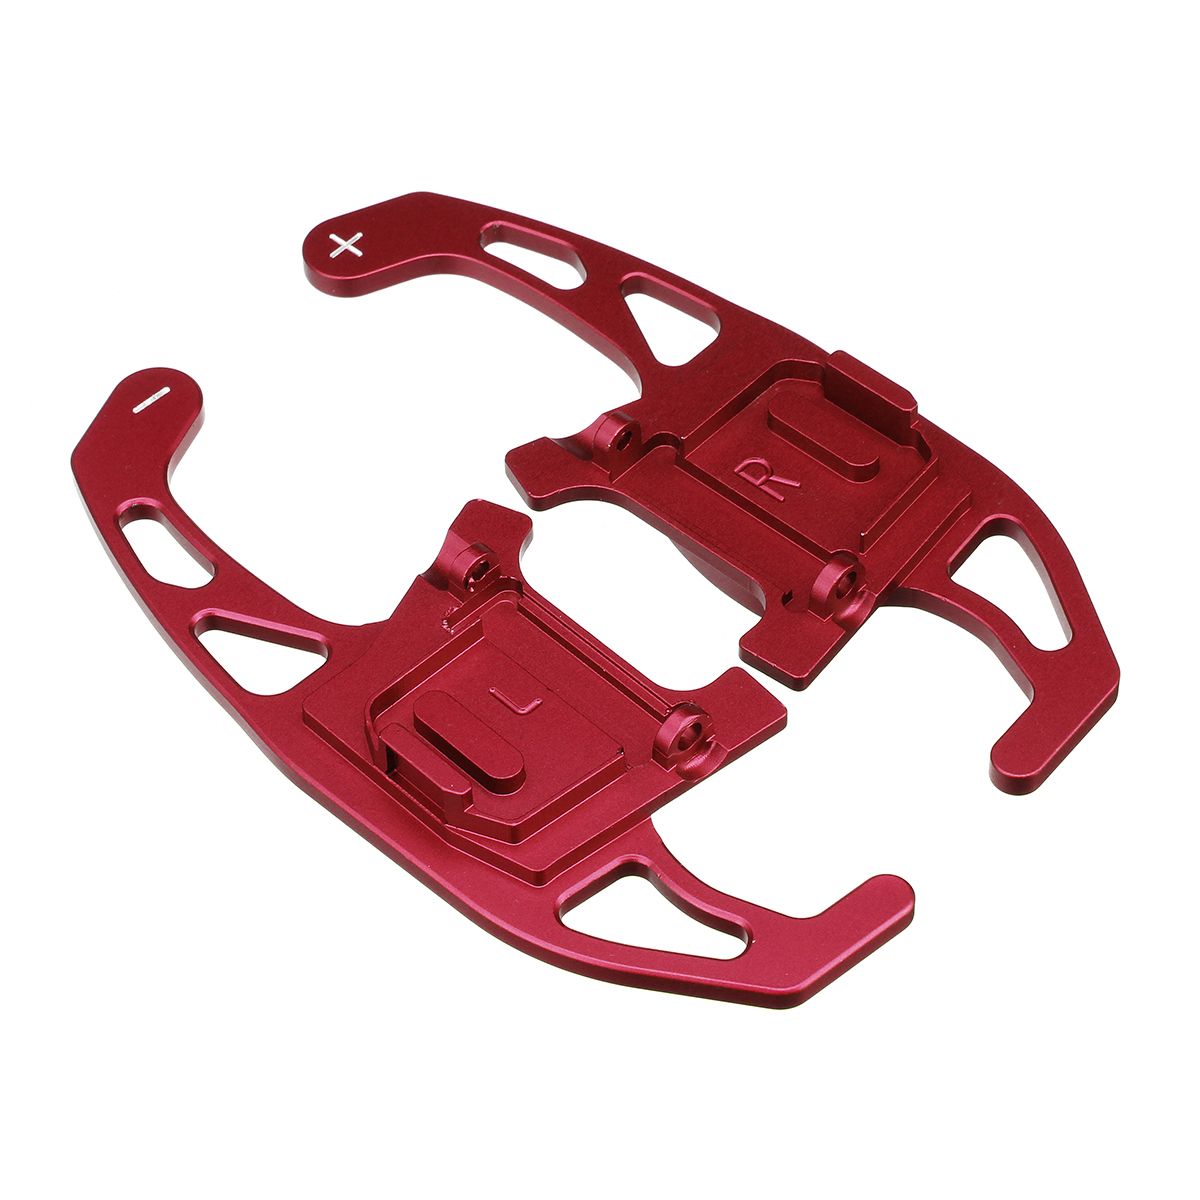 2Pcs-Car-Steering-Wheel-Paddle-Extend-Shifter-Replacement-Red-For-VW-GOLF-GTI-R-GTD-GTE-MK7-7-POLO-G-1656105